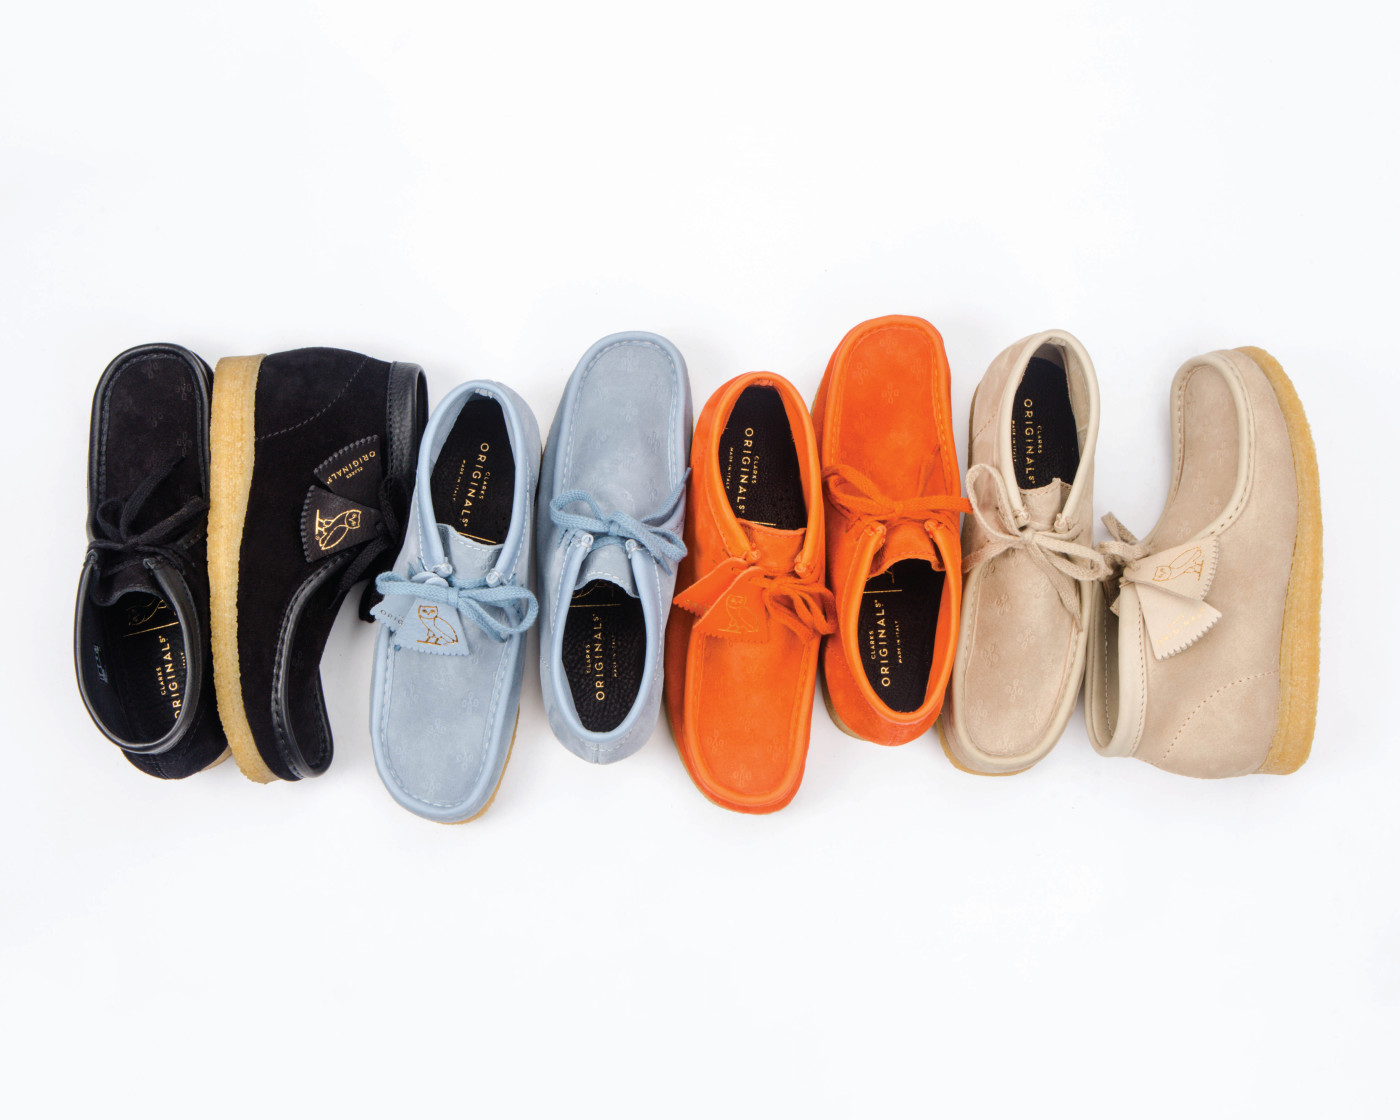 clarks summer shoes 2018